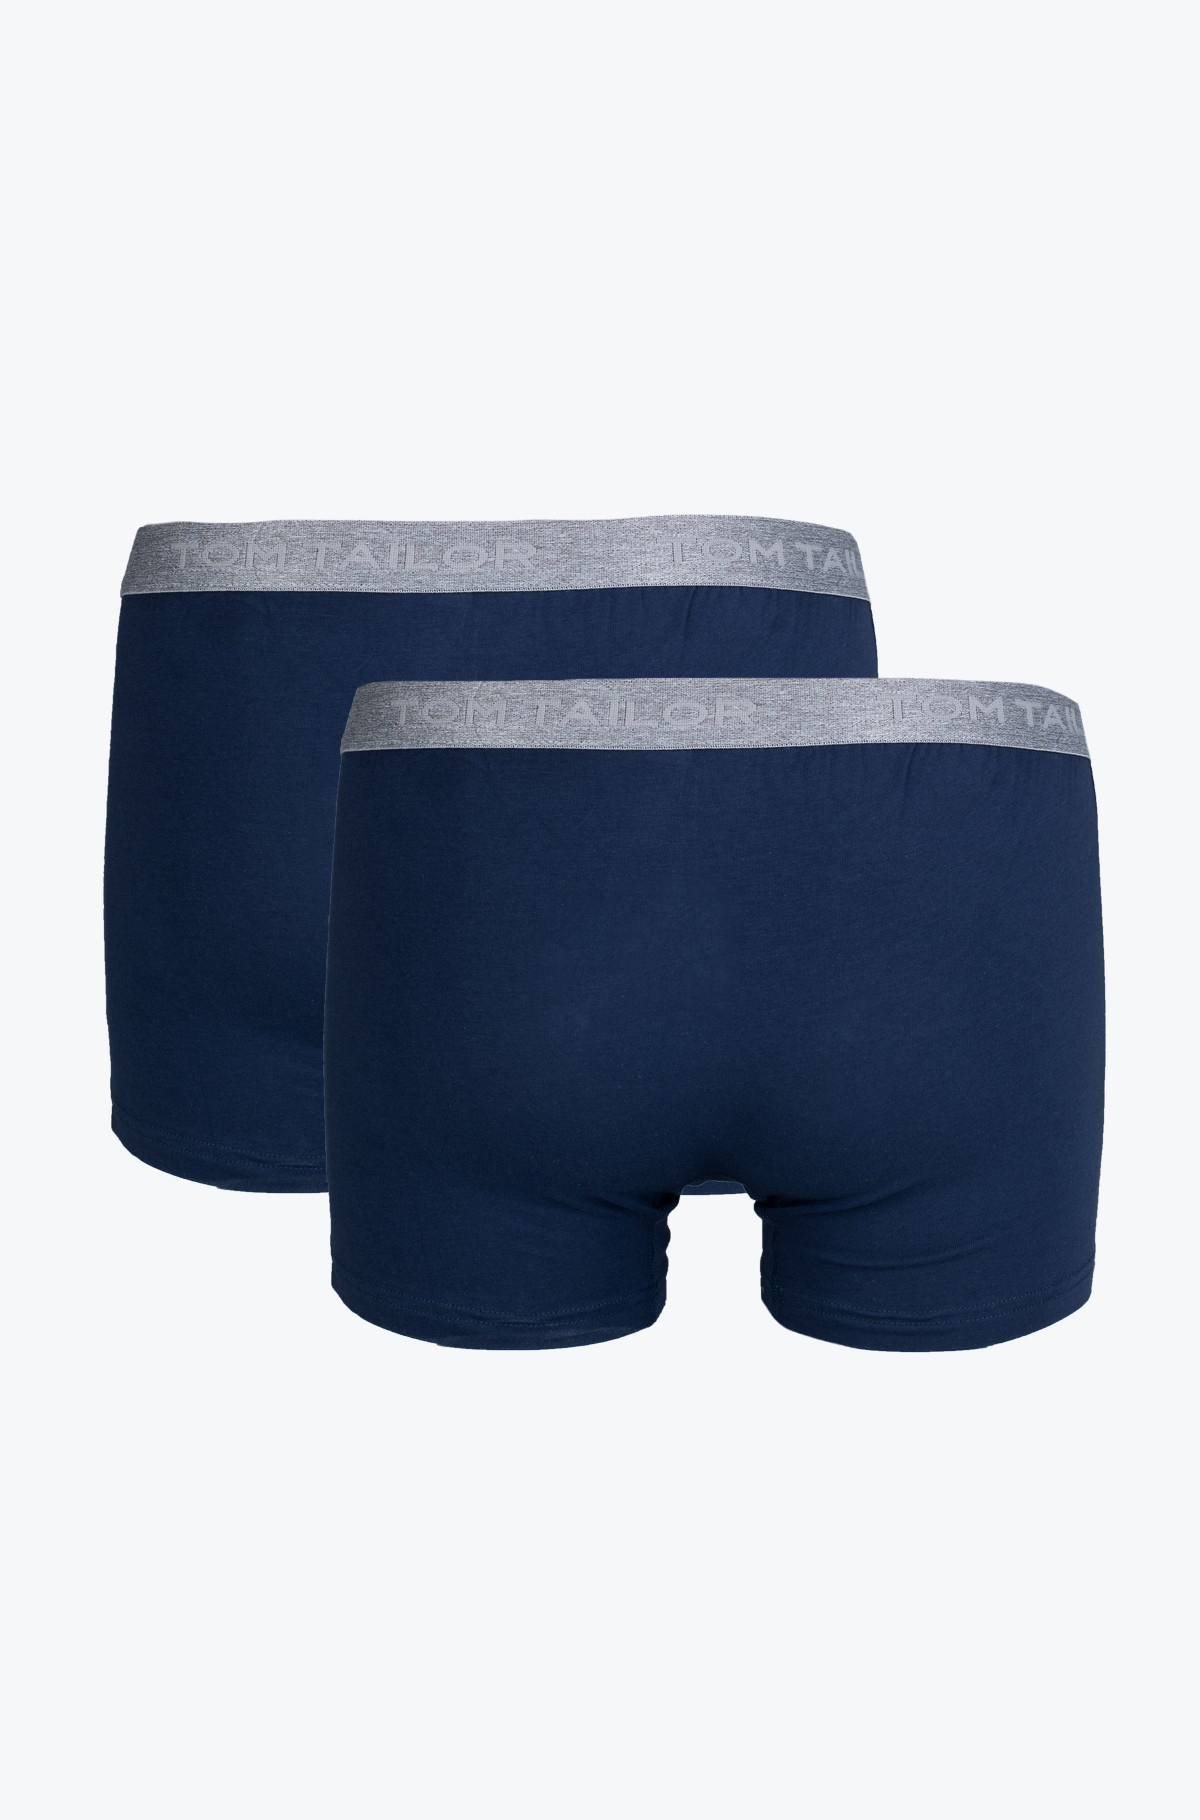 Two pairs of boxers 70249.00.10-full-2